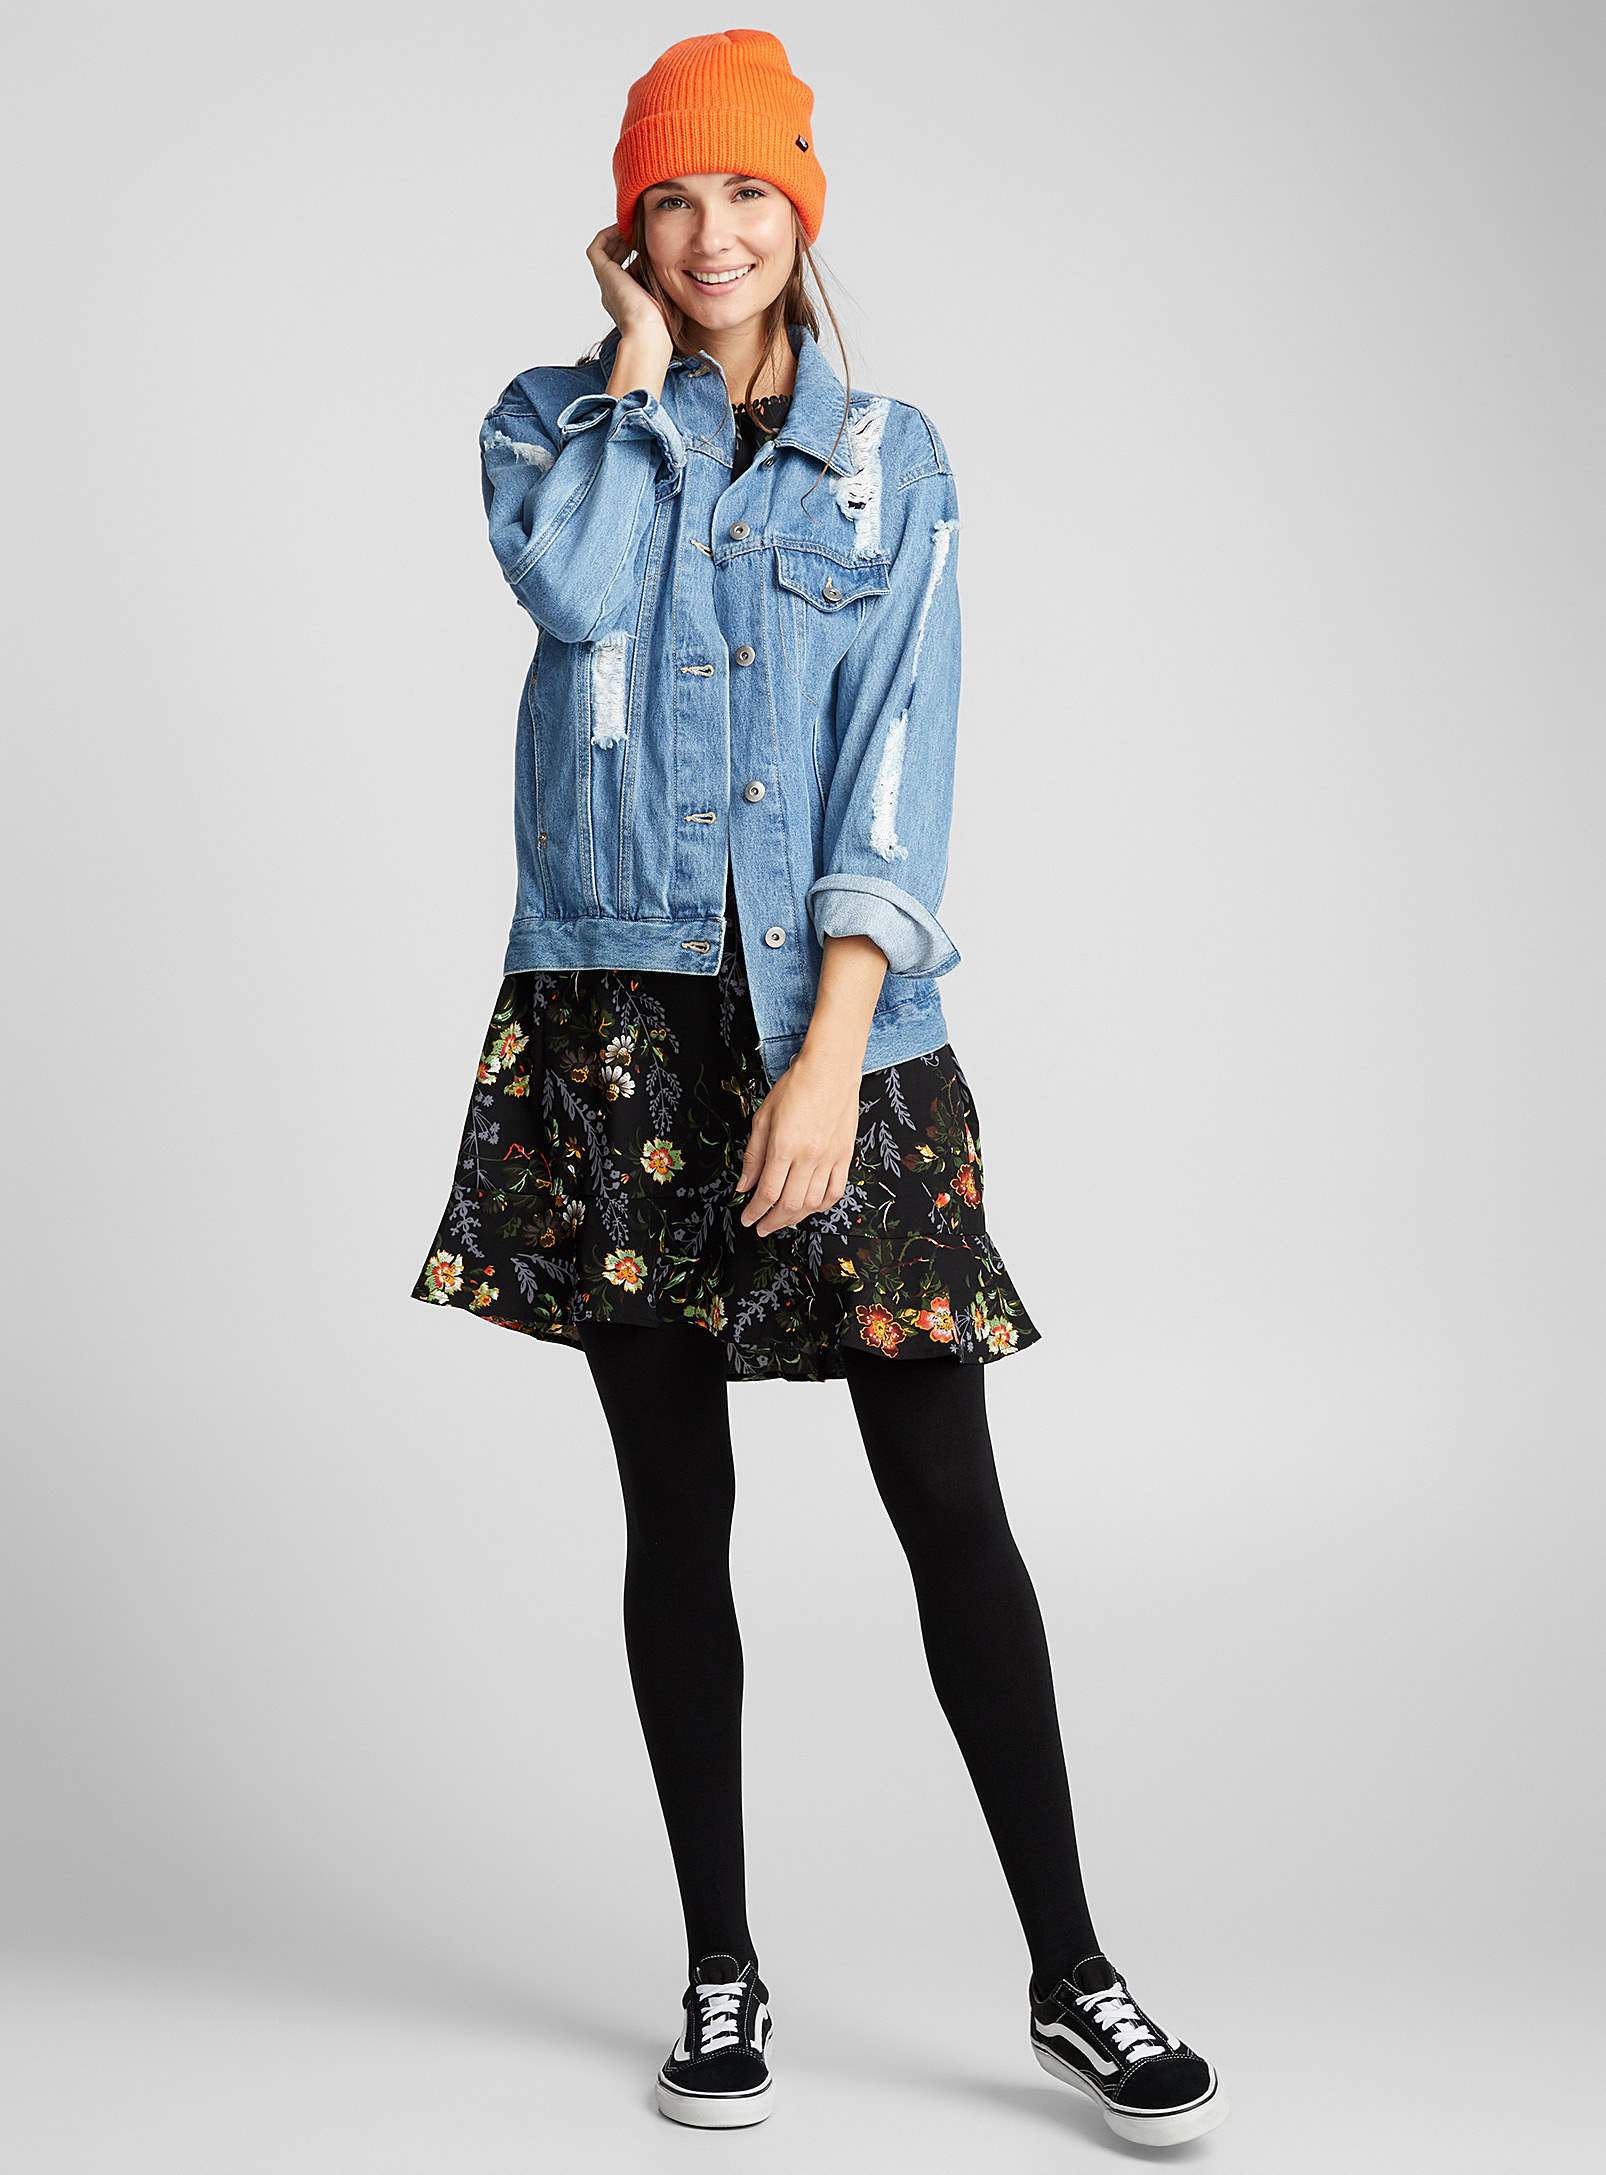 A person wearing thick tights with a dress and denim jacket